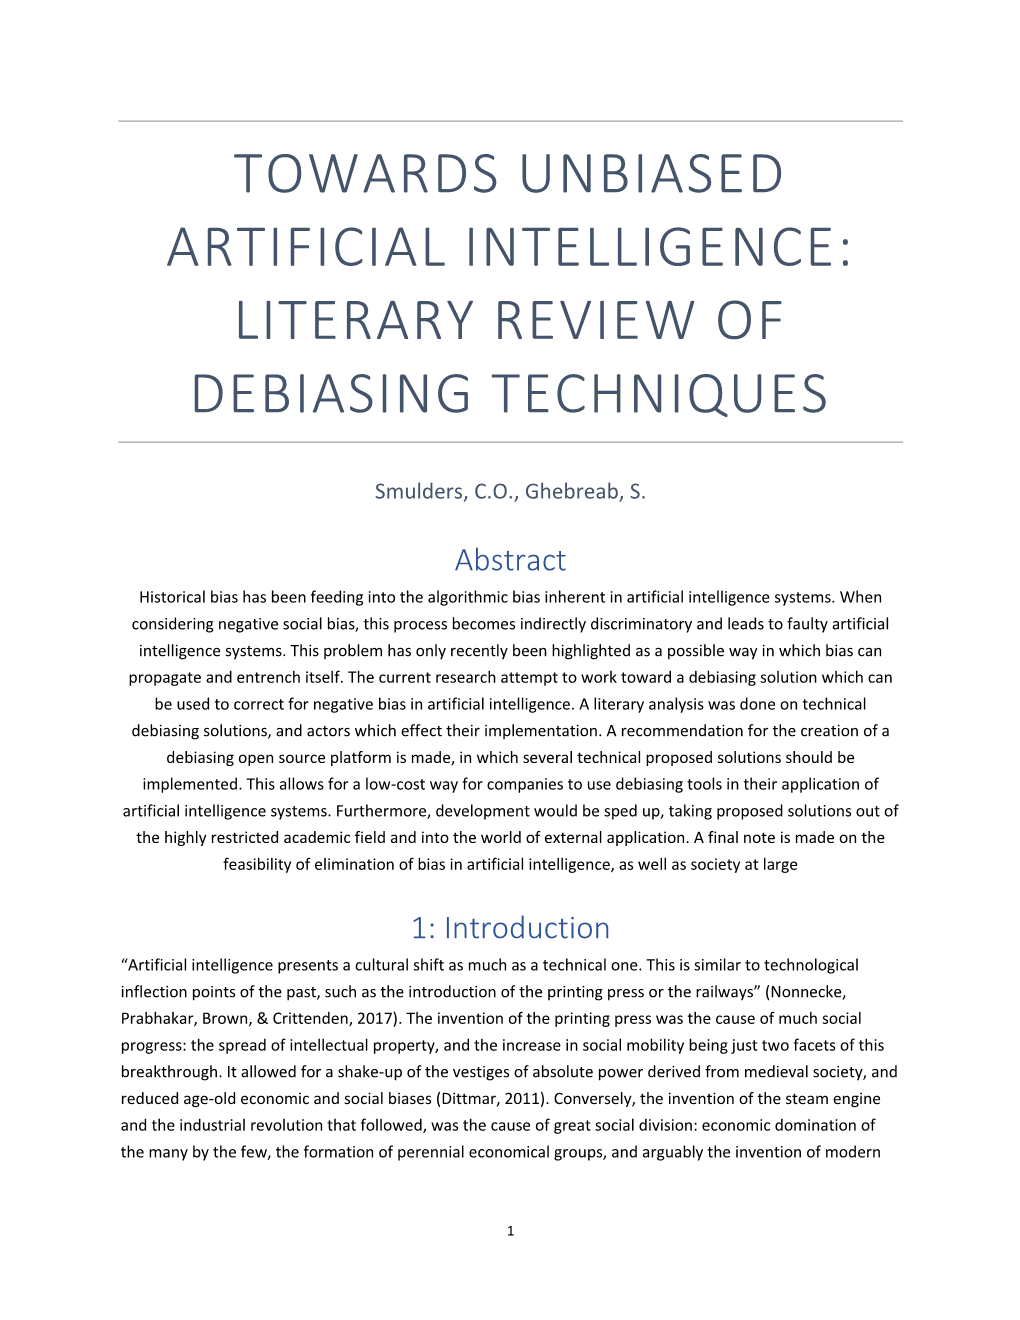 Towards Unbiased Artificial Intelligence: Literary Review of Debiasing Techniques